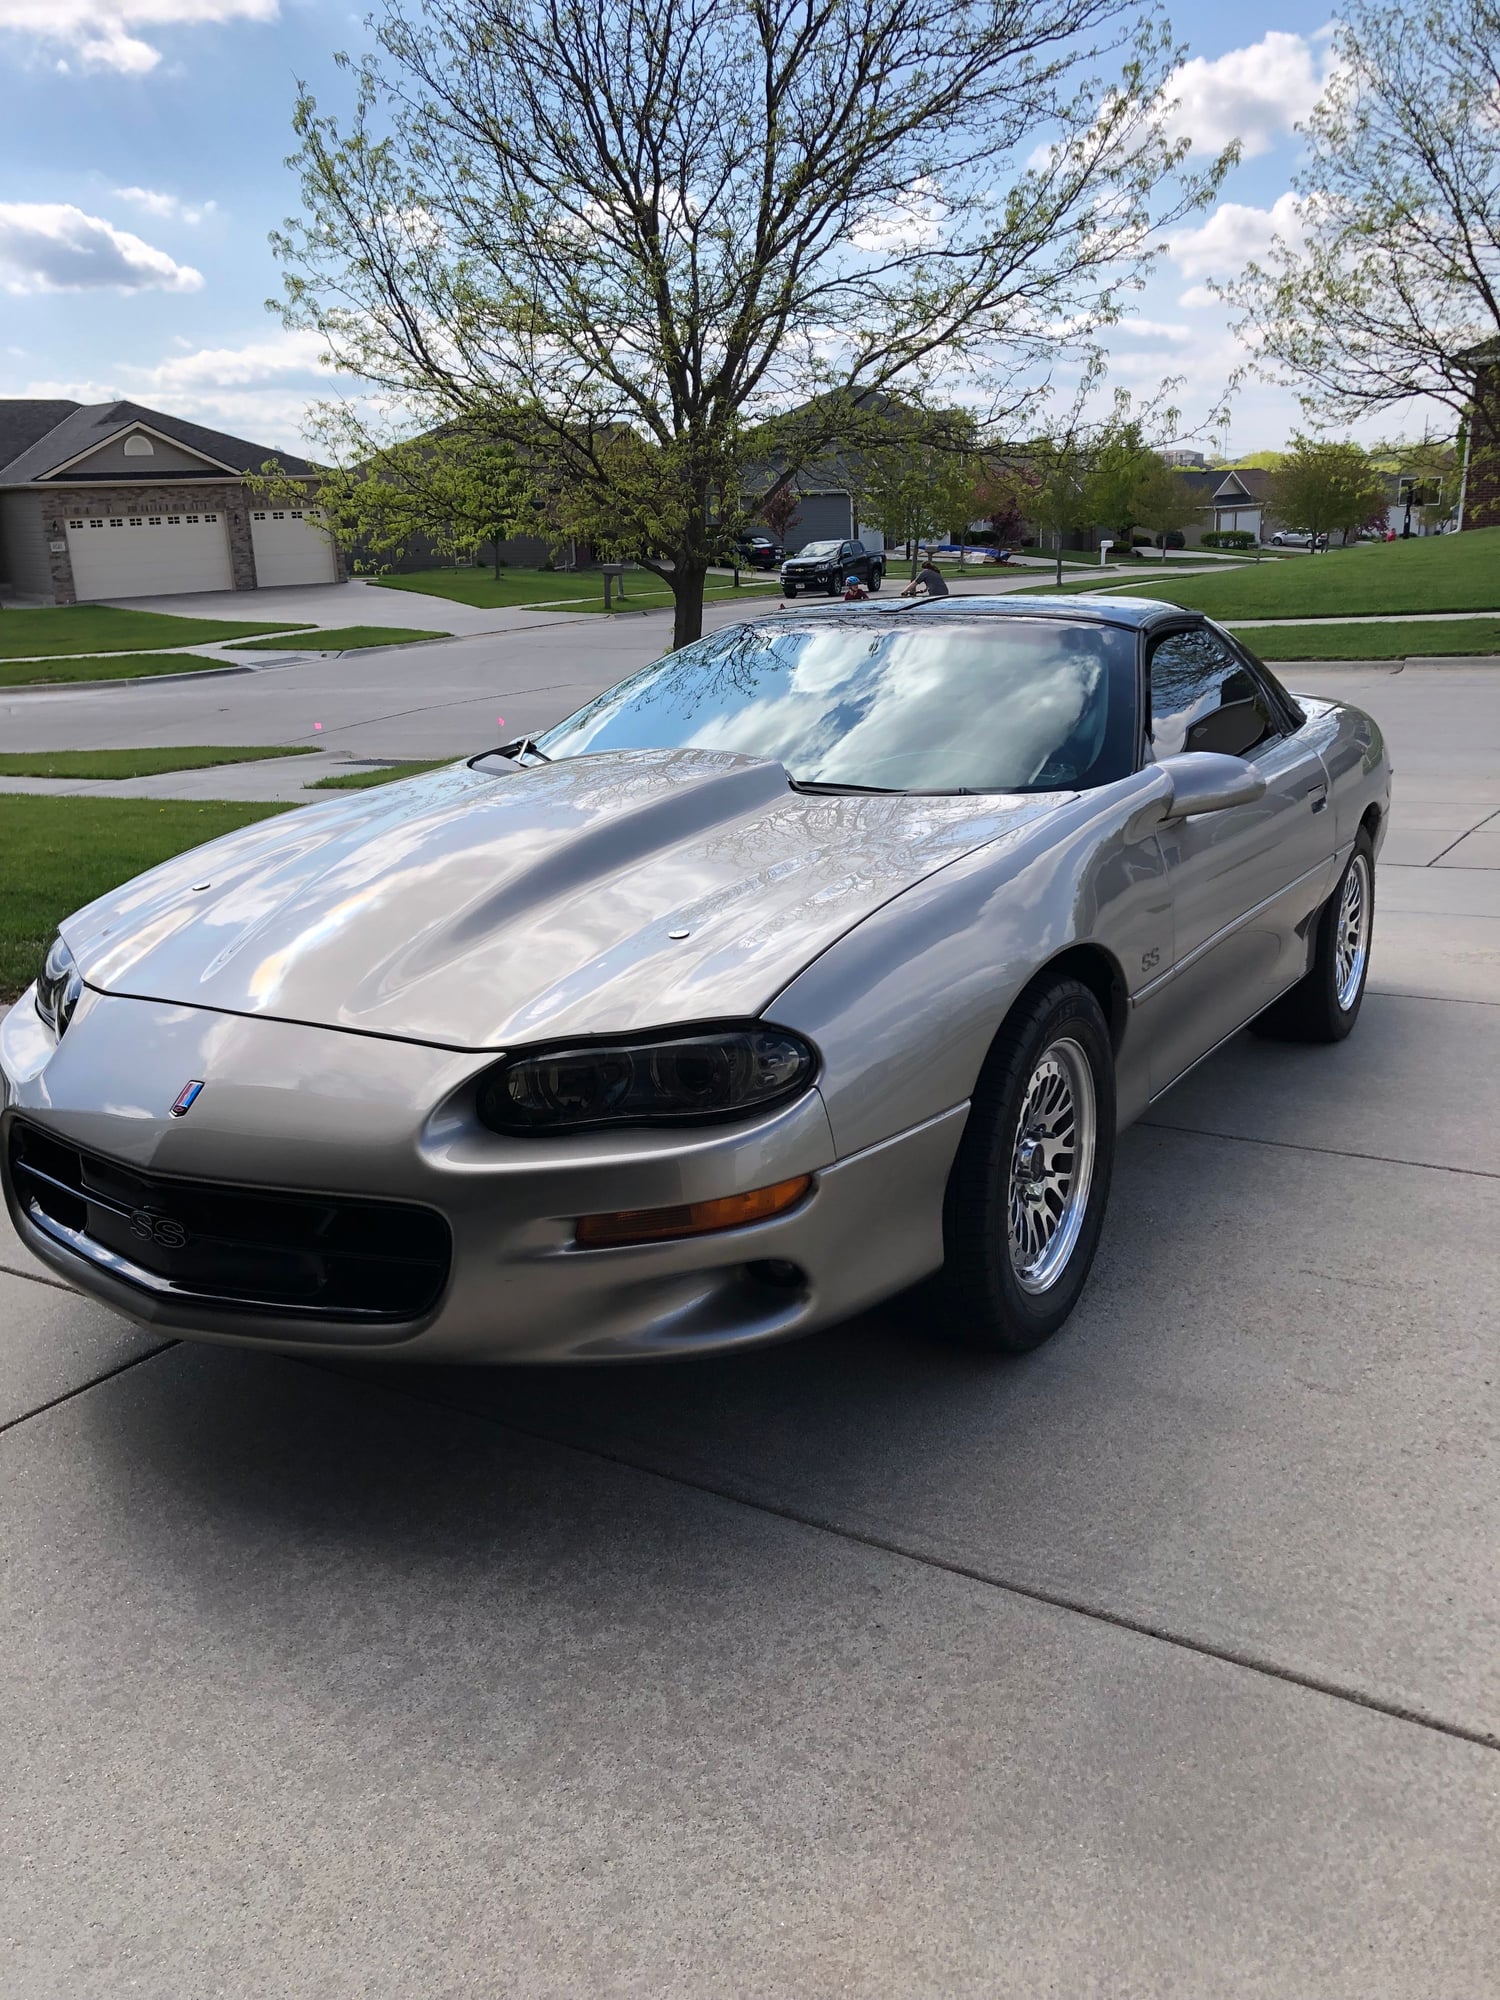 2001 Chevrolet Camaro - 01 Z28 408 Clean Nice Well Built Car - 89,000 on body OBO/Trade - Used - VIN 2G1FP22G912142237 - 8 cyl - 2WD - Automatic - Coupe - Other - Lincoln, NE 68526, United States